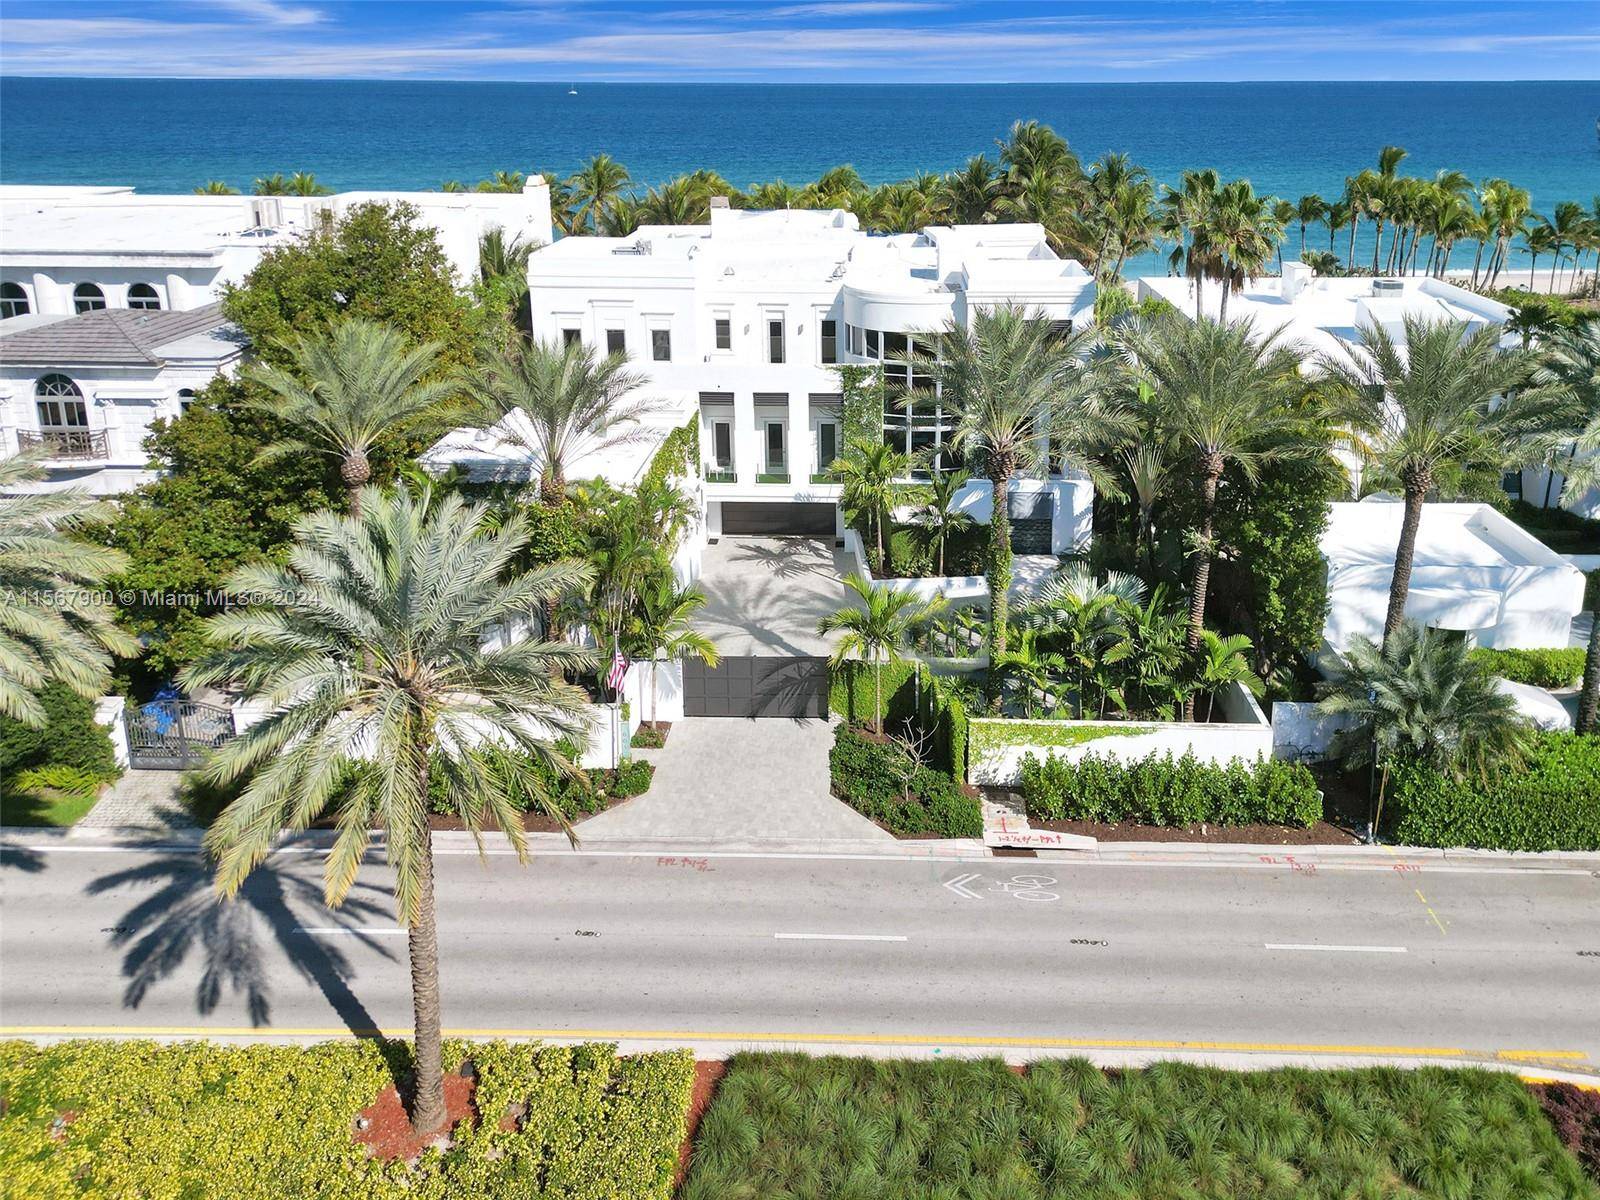 Step into paradise with this 7 bed, 8 bath stunner sprawled across 13, 000 sqft !